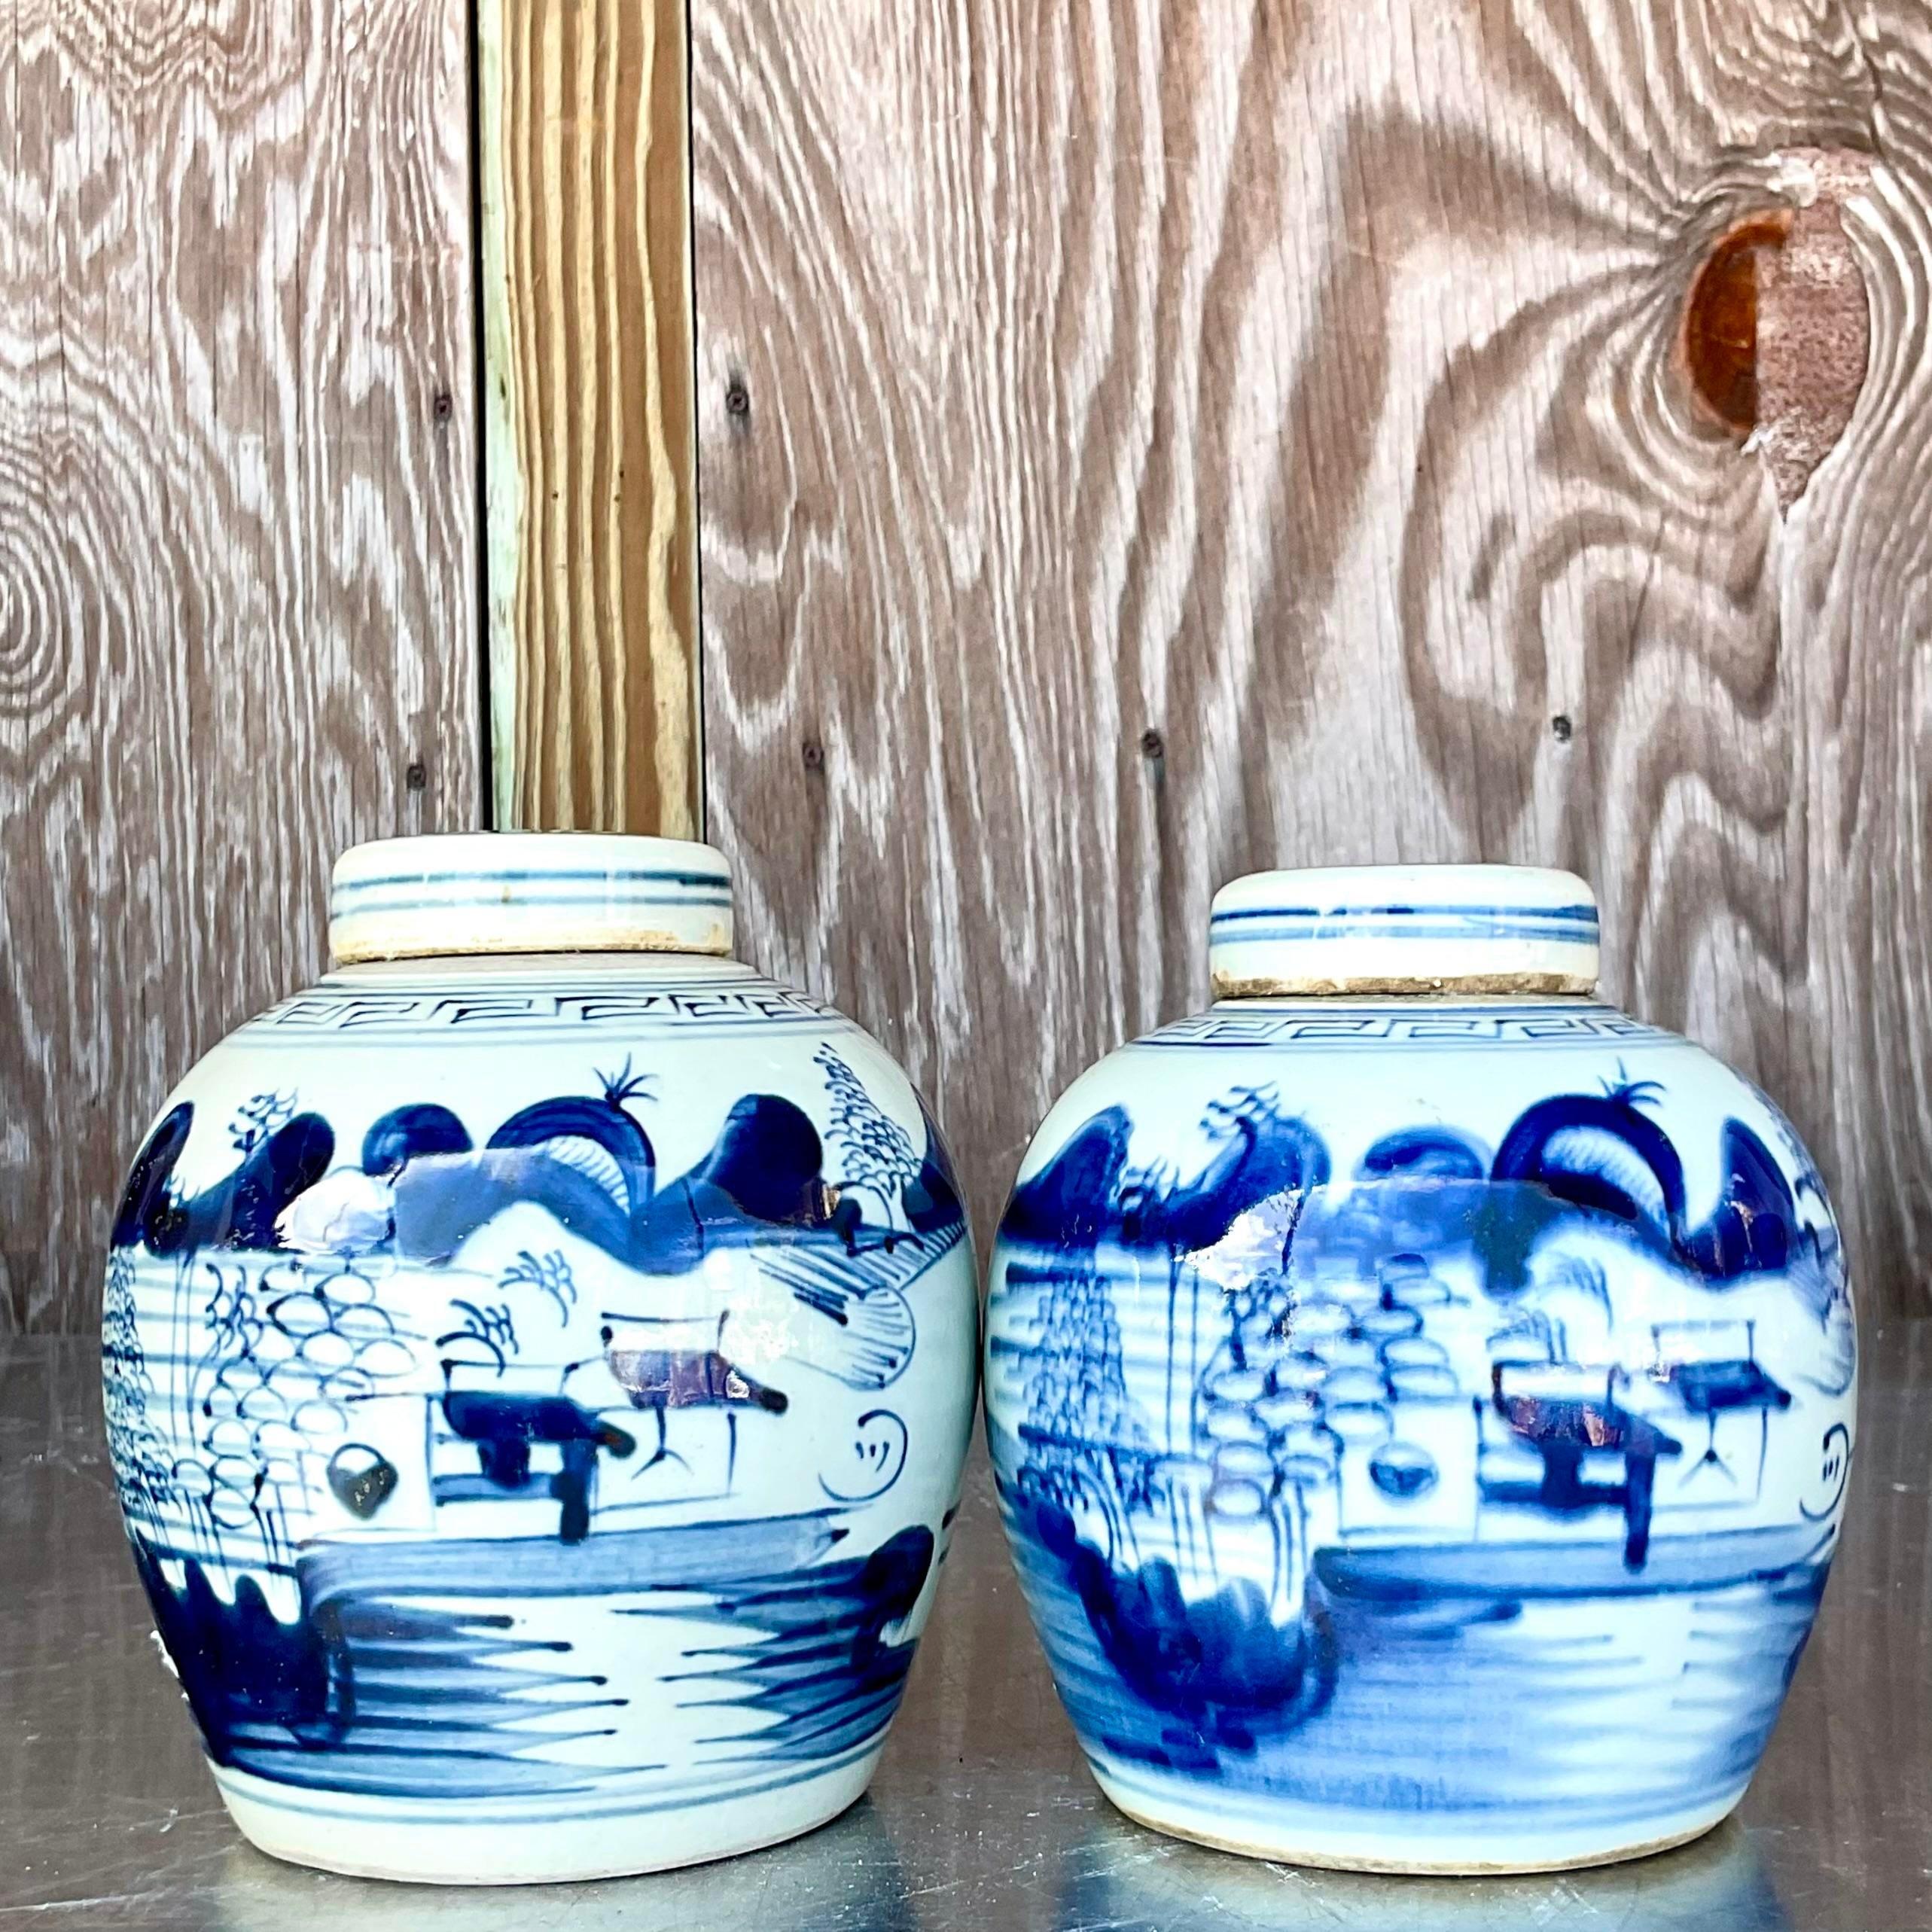 20th Century Vintage Asian Petite Blue and White Lidded Jars - Set of 2 For Sale